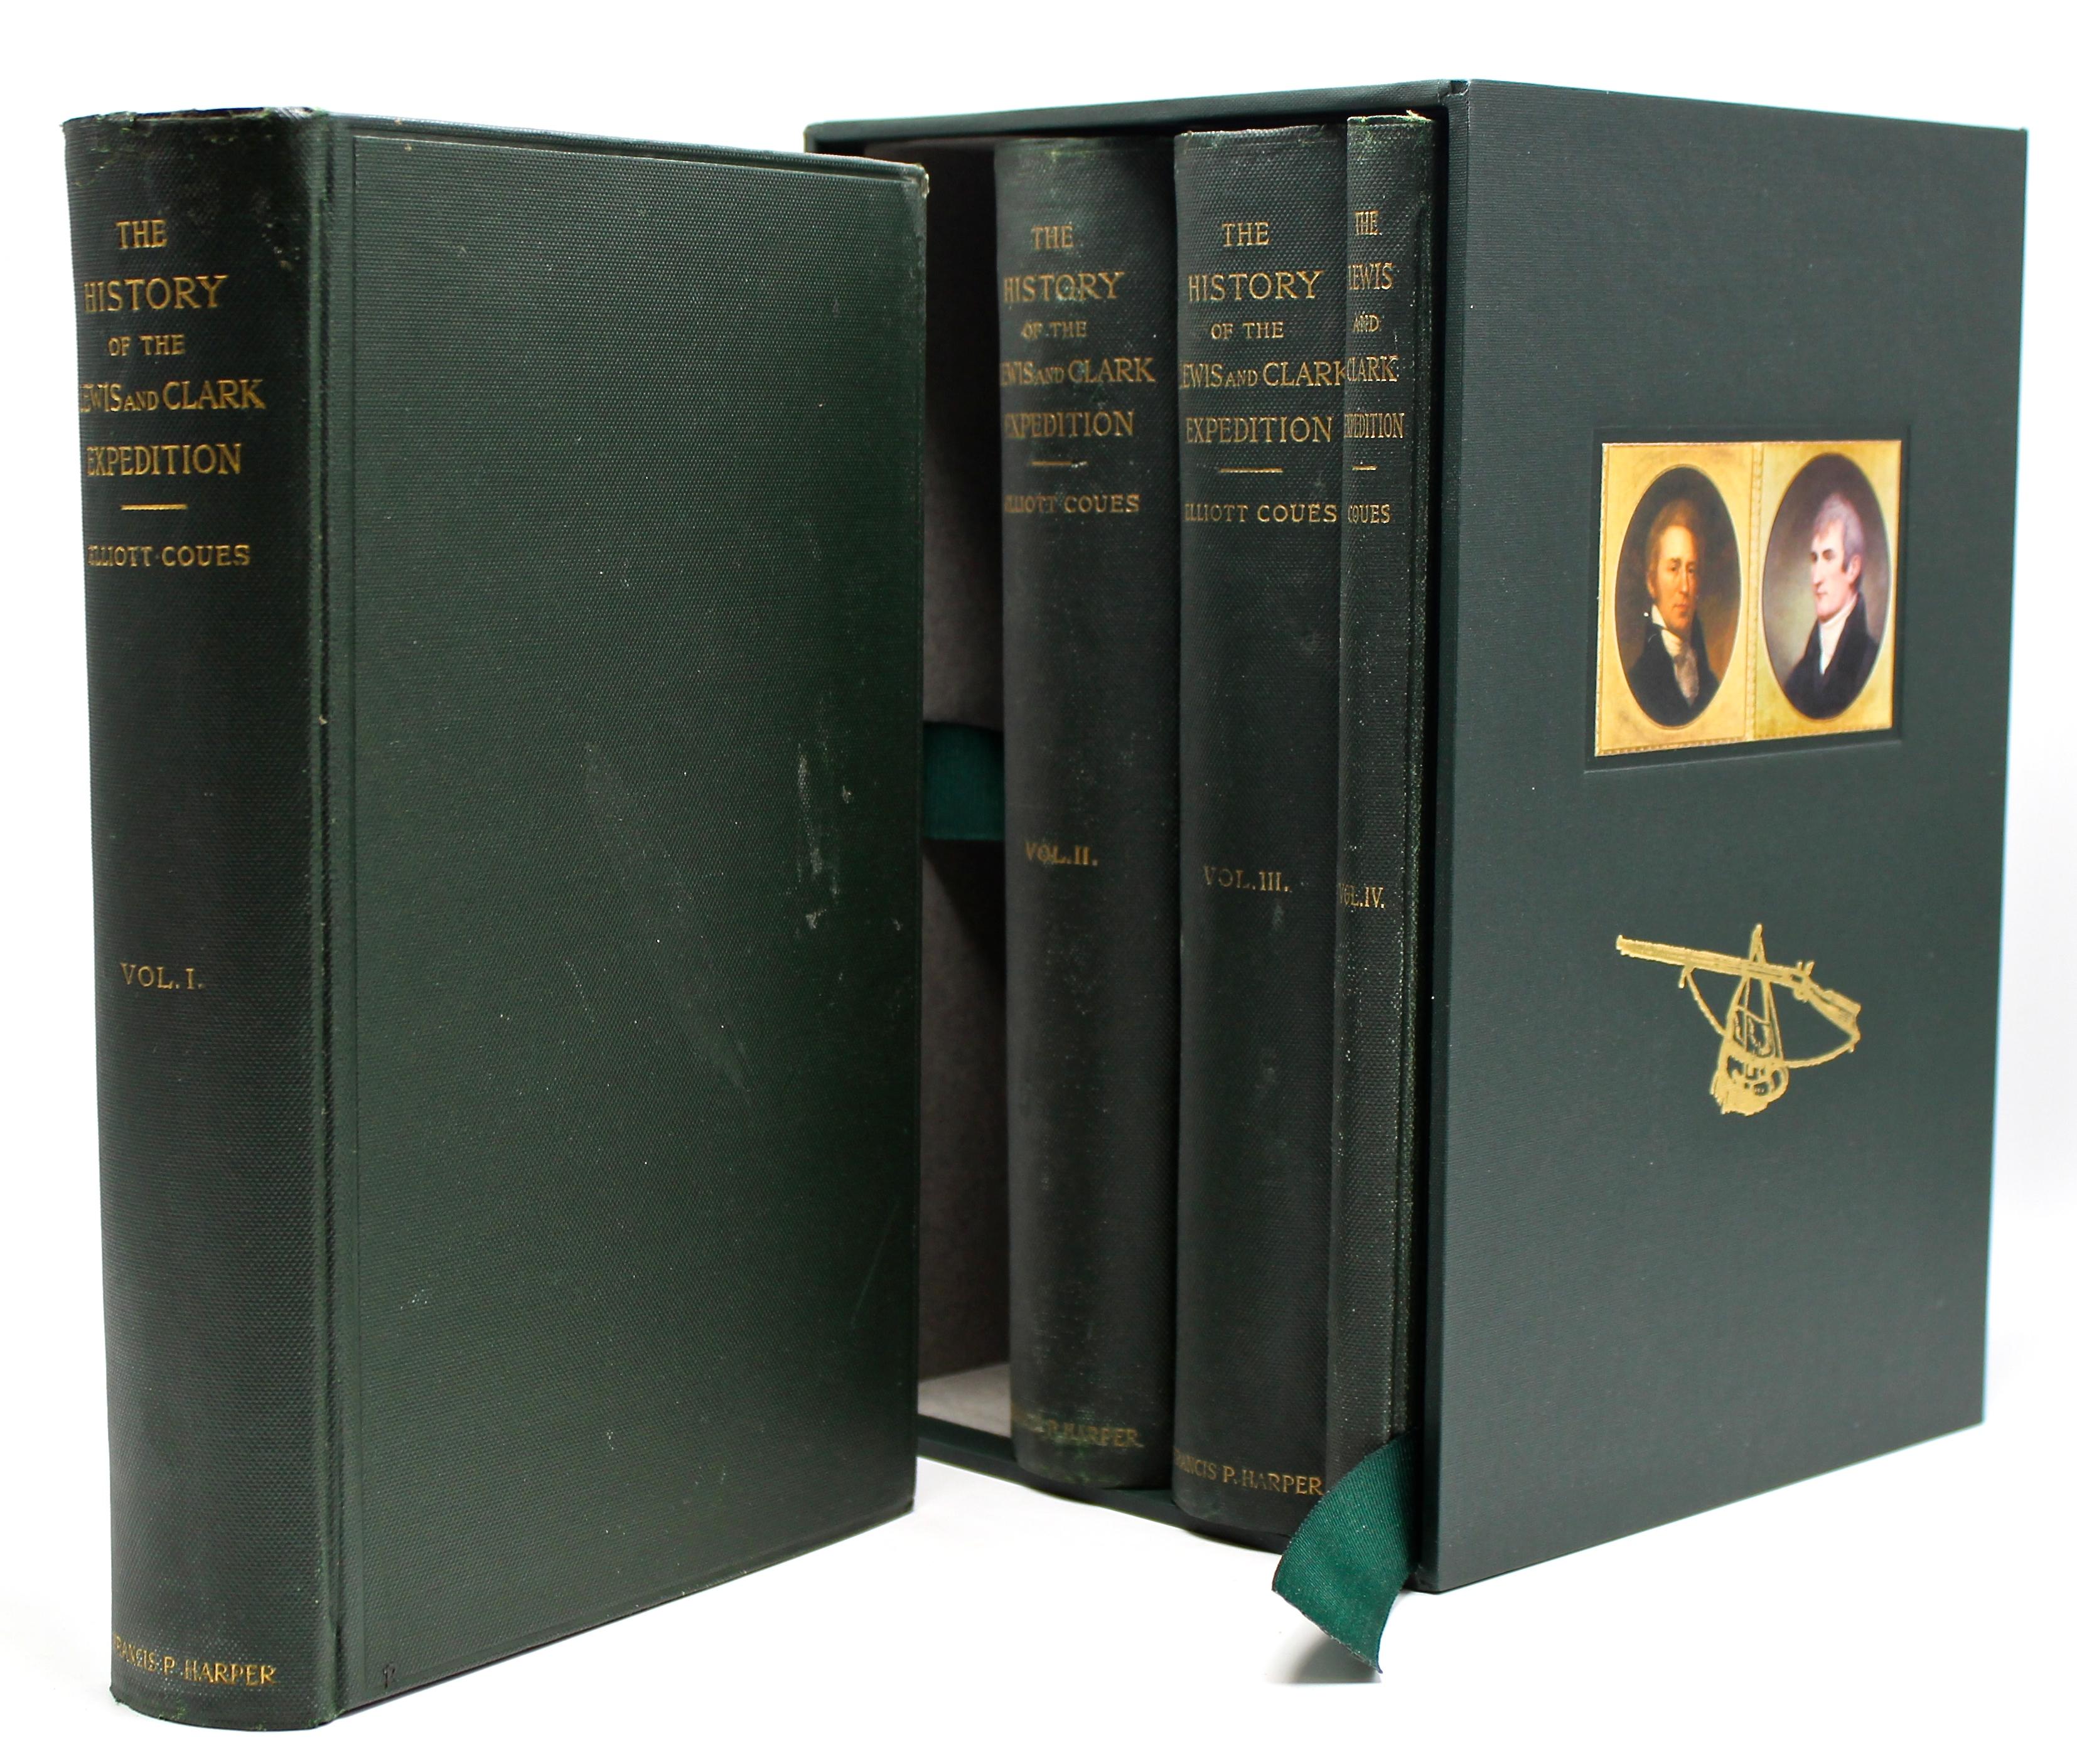 Edited by Elliott Coues. History of the Lewis and Clark Expedition. New York: Francis P. Harper, 1893. Four-volume set. Review copy of limited edition on handmade paper. Housed in custom slipcase.

Presented is a review copy of the limited edition